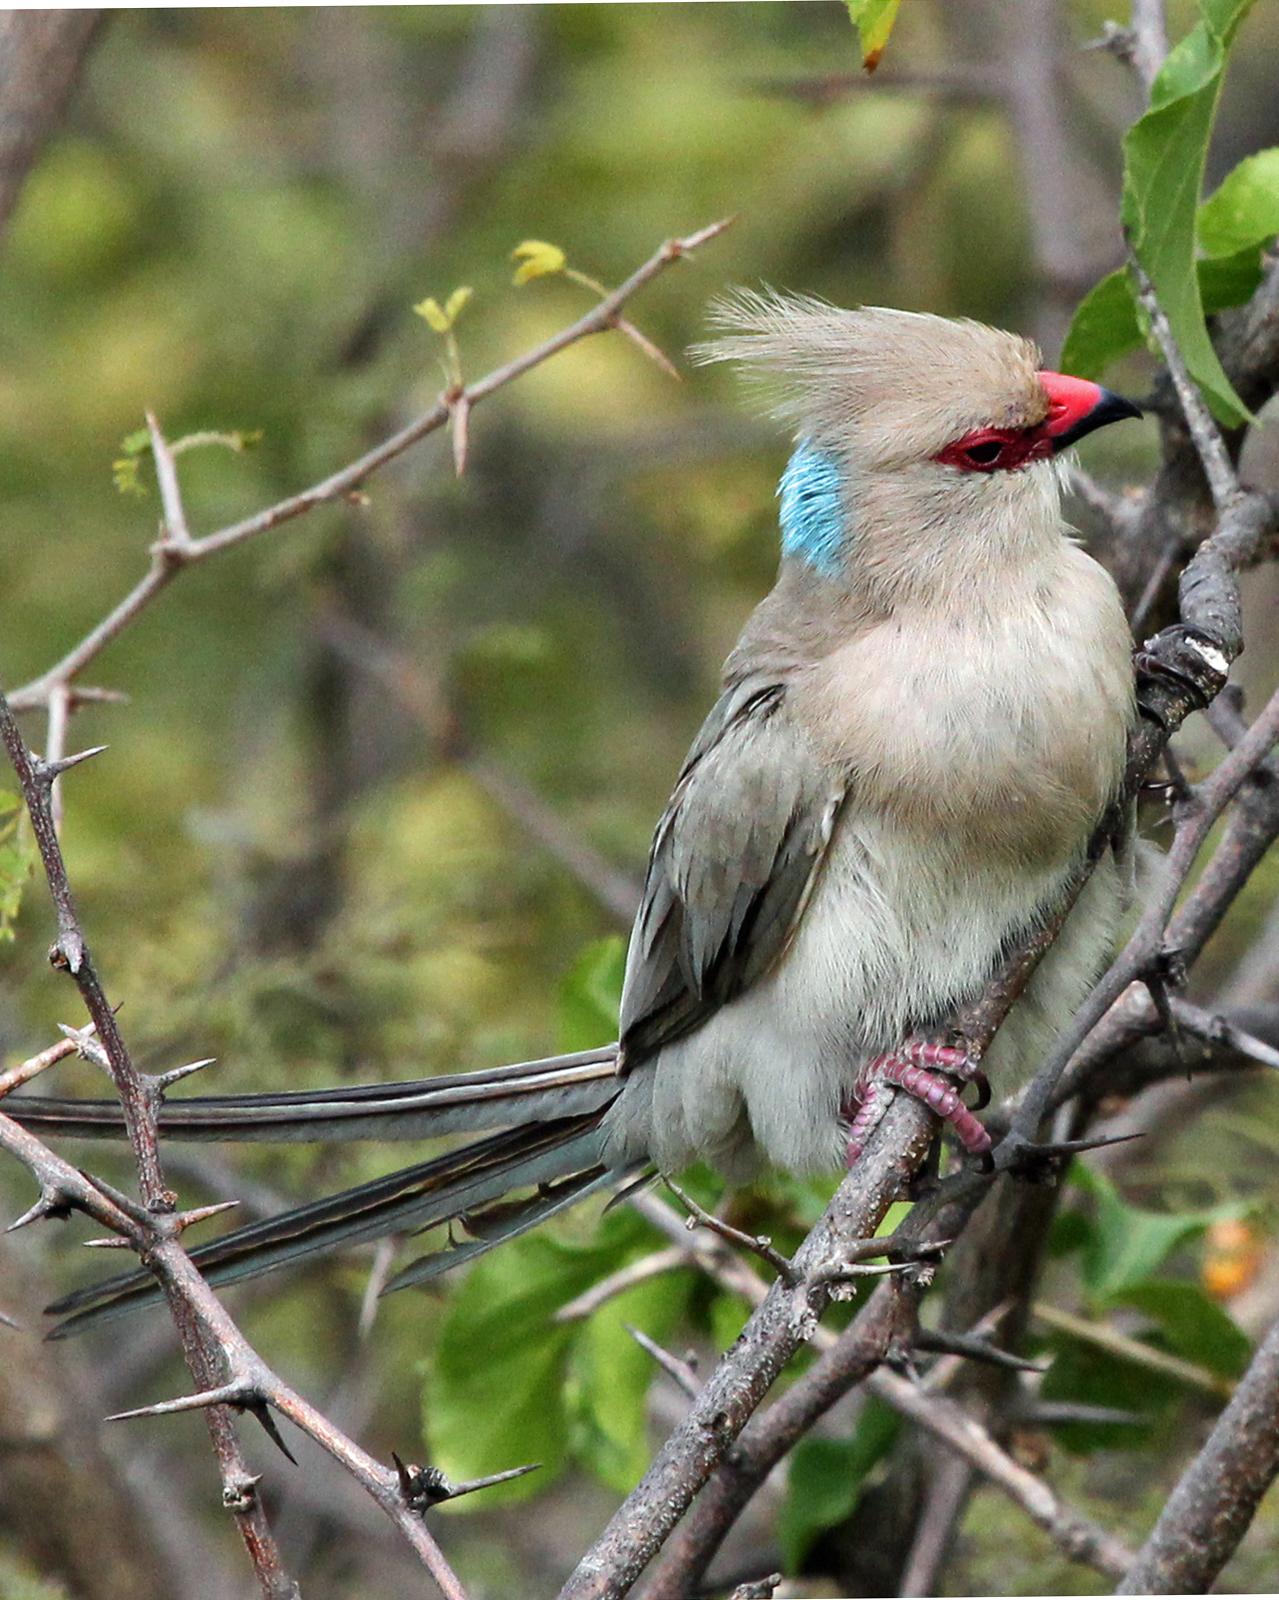 Blue-naped Mousebird Photo by Robert Polkinghorn